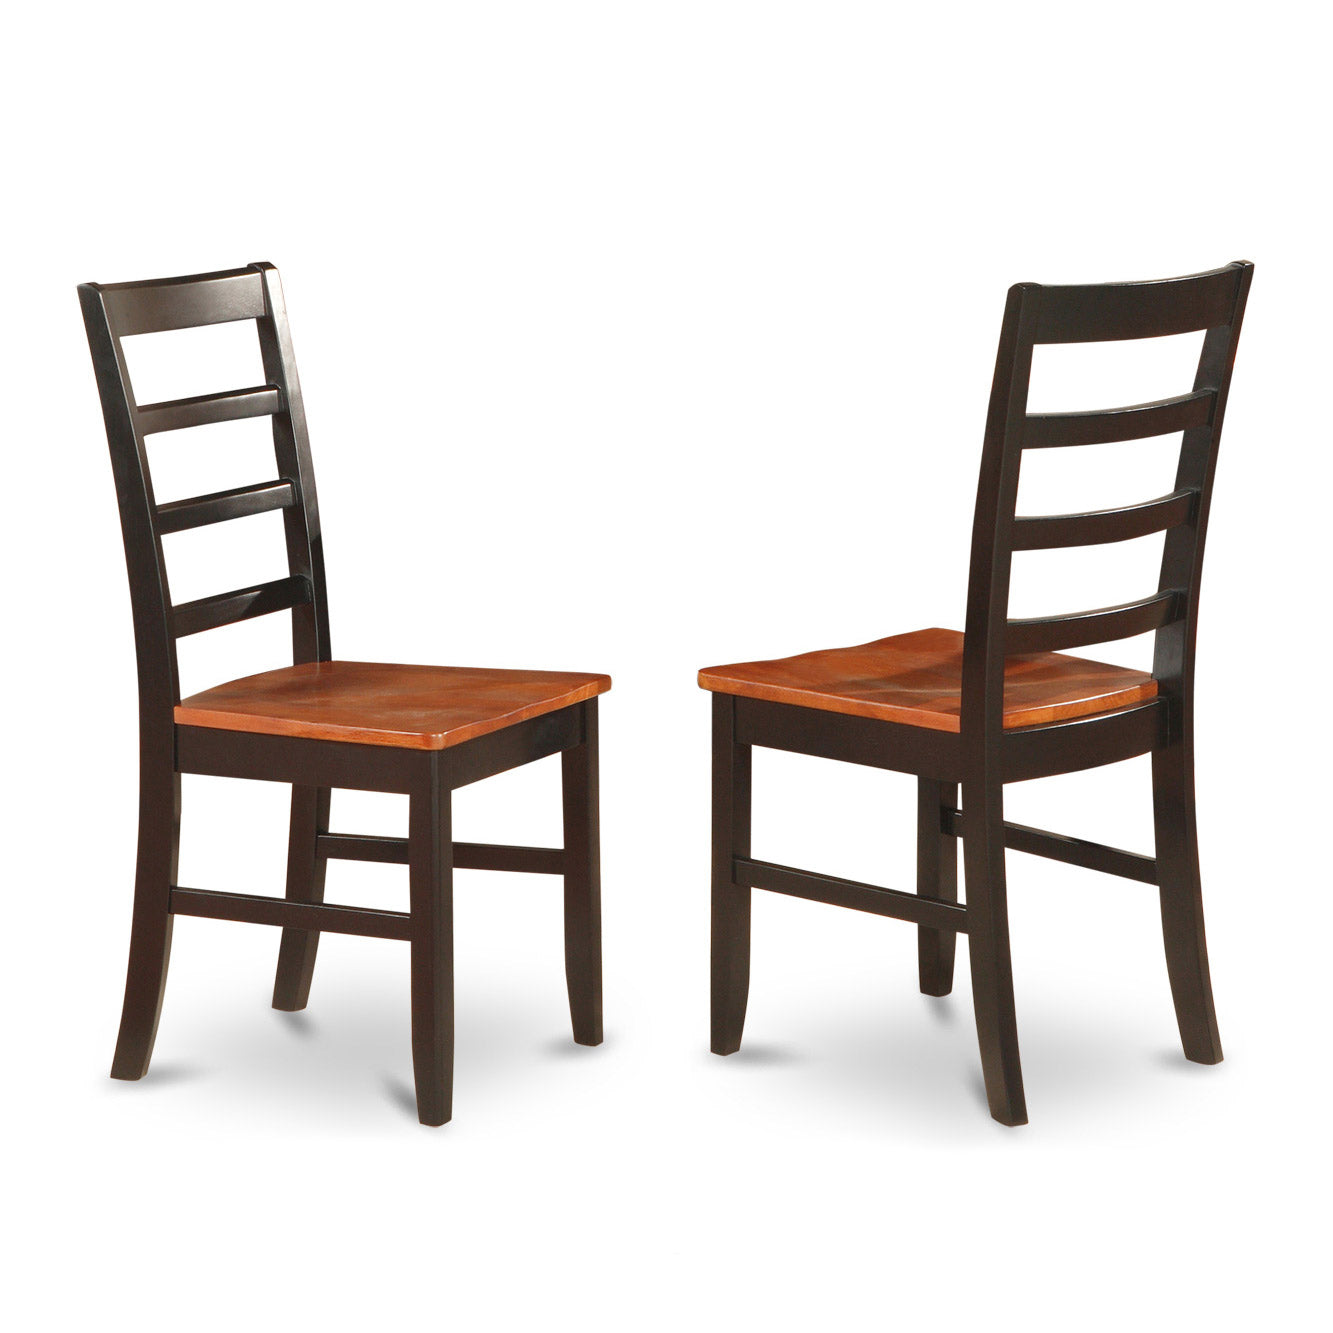 HLPF3-BCH-W 3 Pc set with a Round Small Table and 2 Leather Dinette Chairs in Black and Cherry